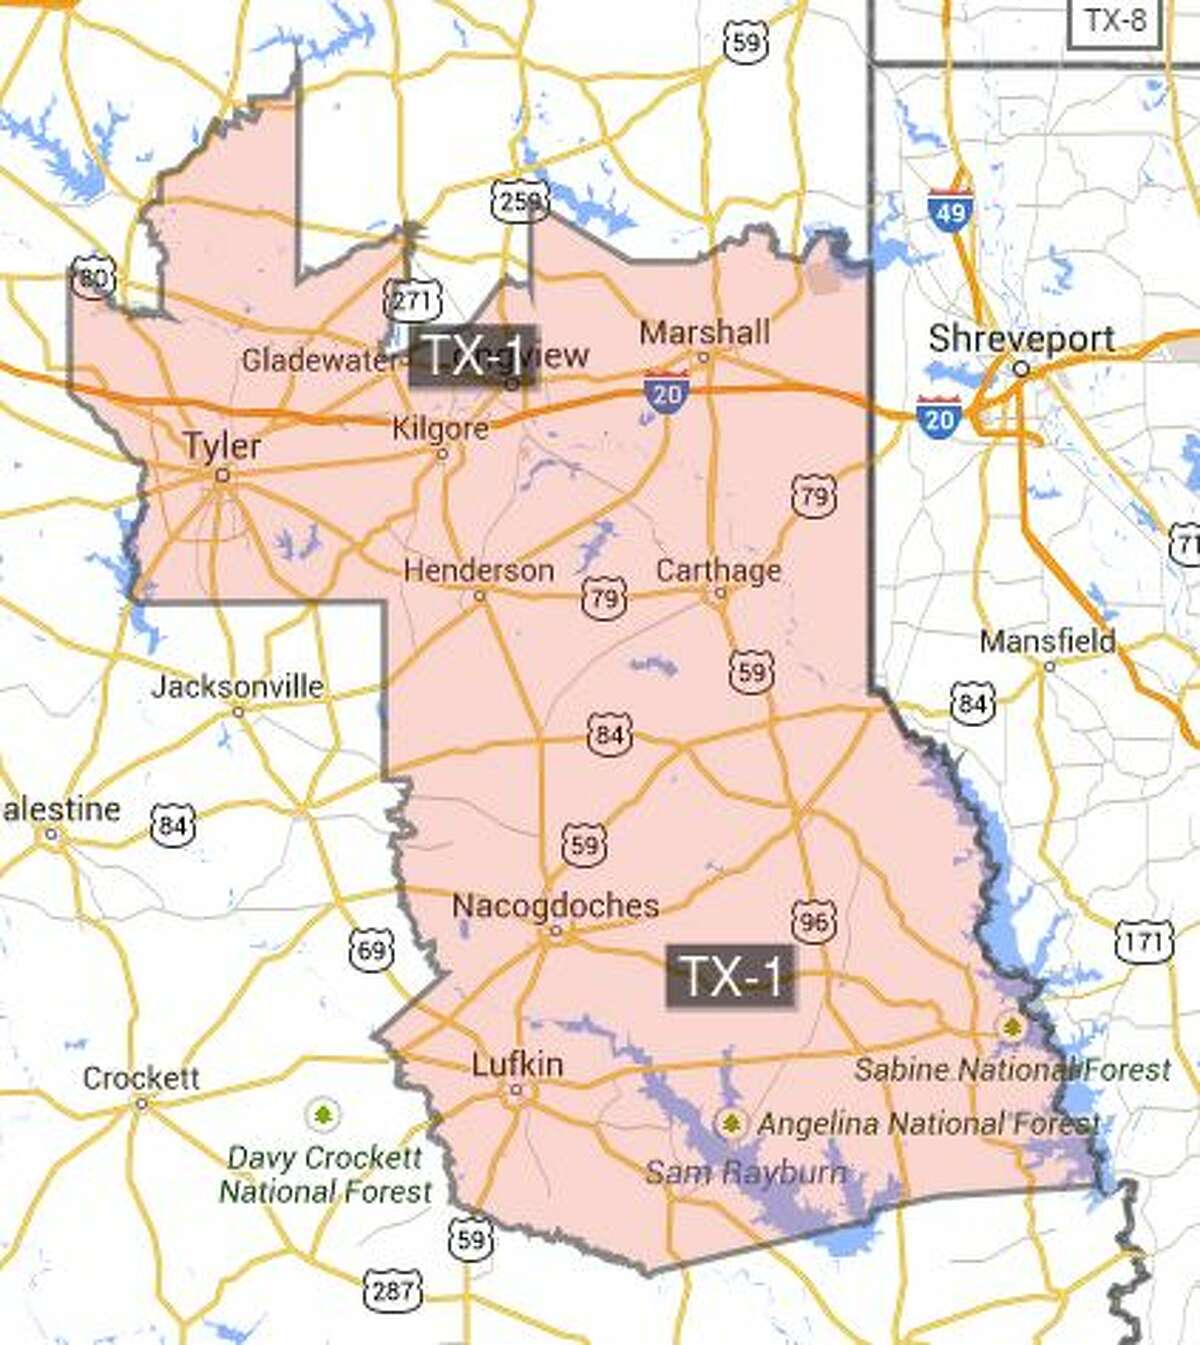 Texas congressional districts, ranked from most to least gerrymanderedHouse District: 1 Representative: Louie Gohmert-R 2014 margin of victory: 54.9 percentChallenger: Shirley McKellar-D